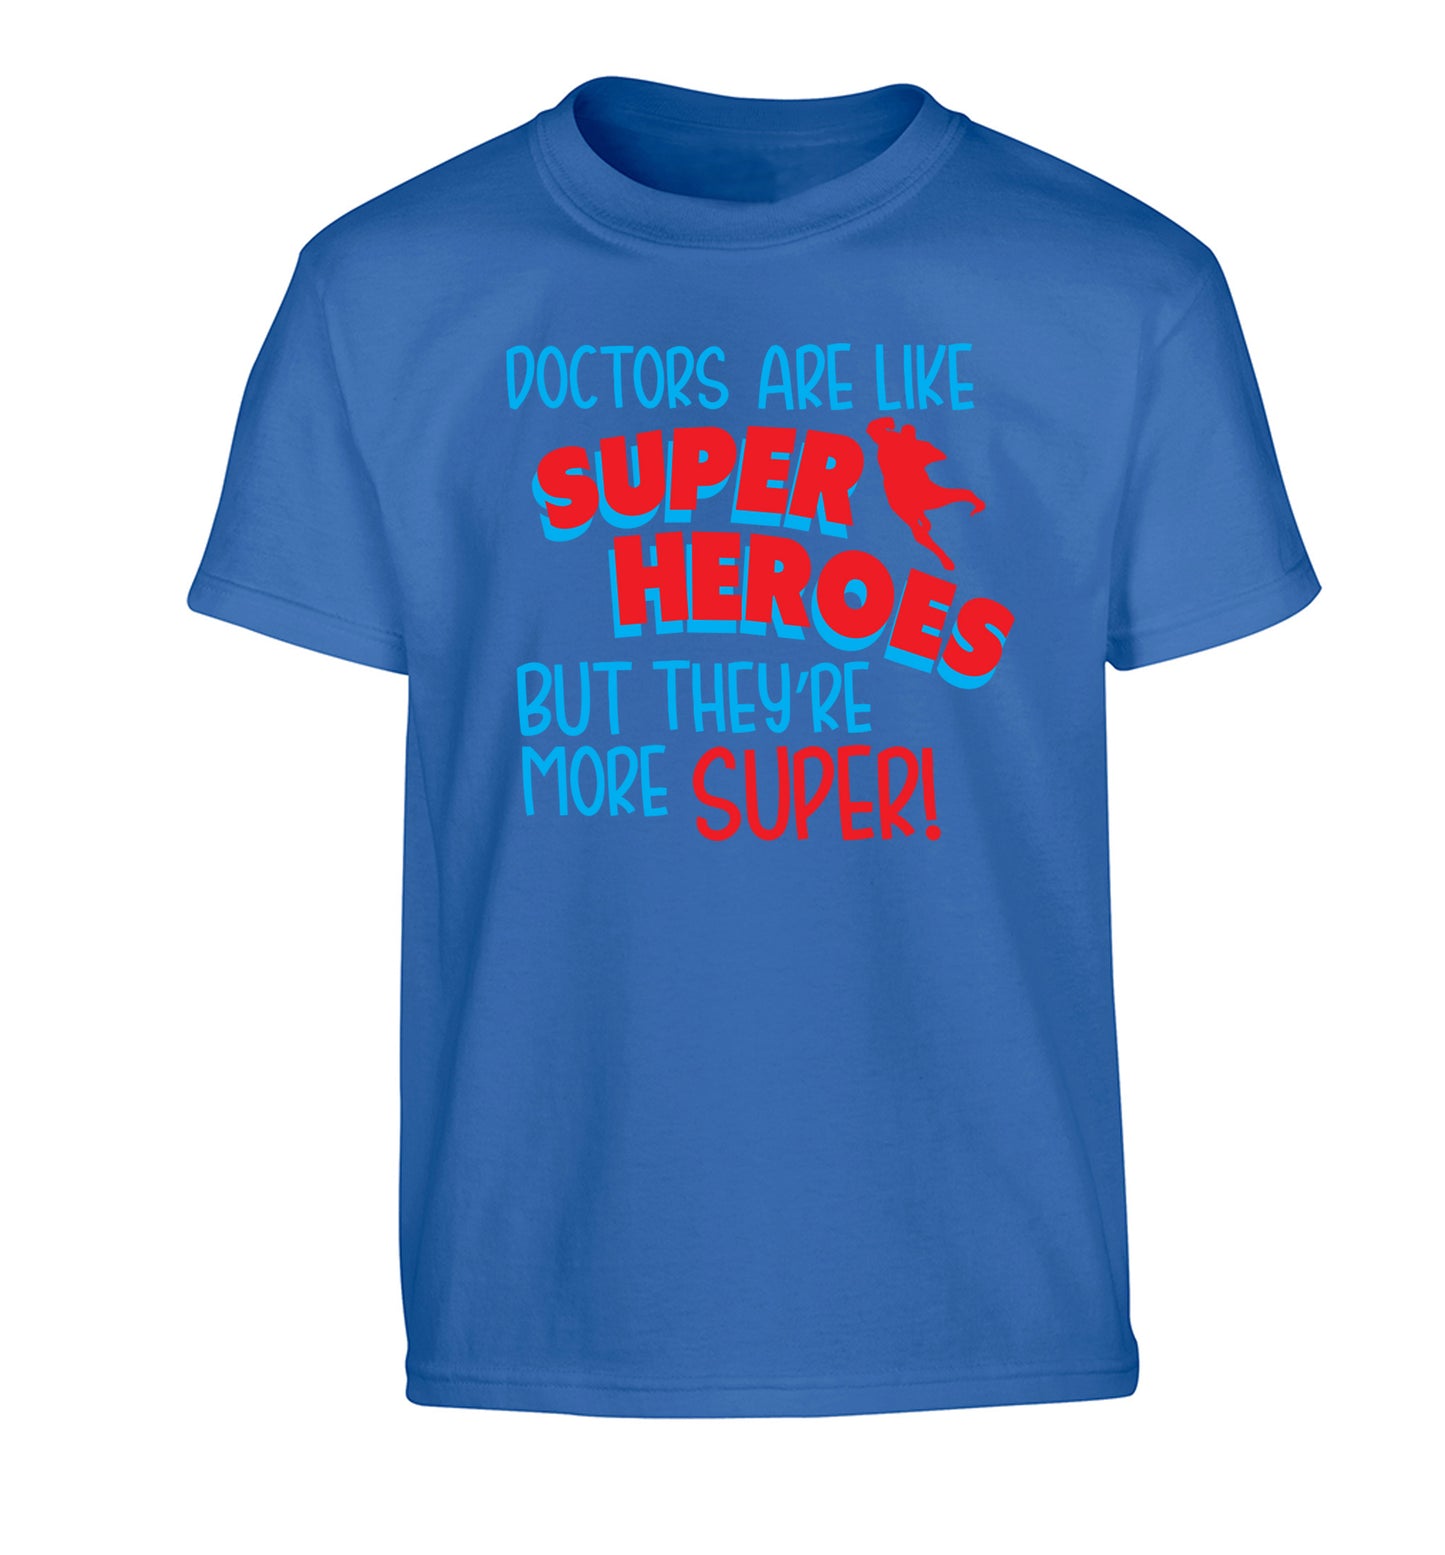 Doctors are like superheros but they're more super Children's blue Tshirt 12-13 Years